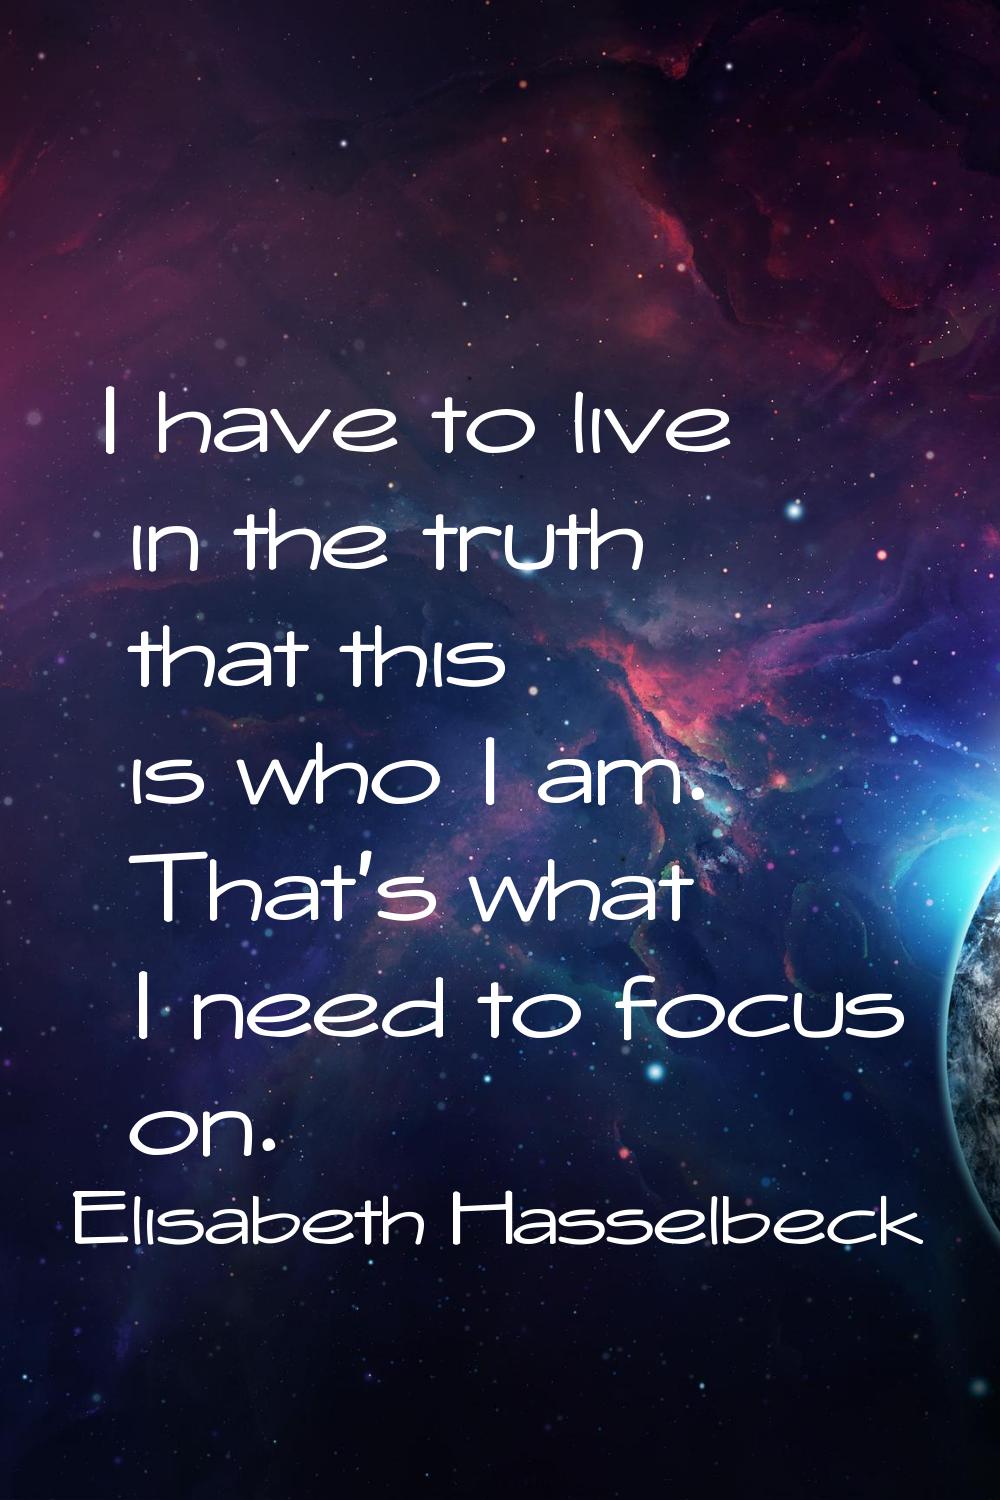 I have to live in the truth that this is who I am. That's what I need to focus on.